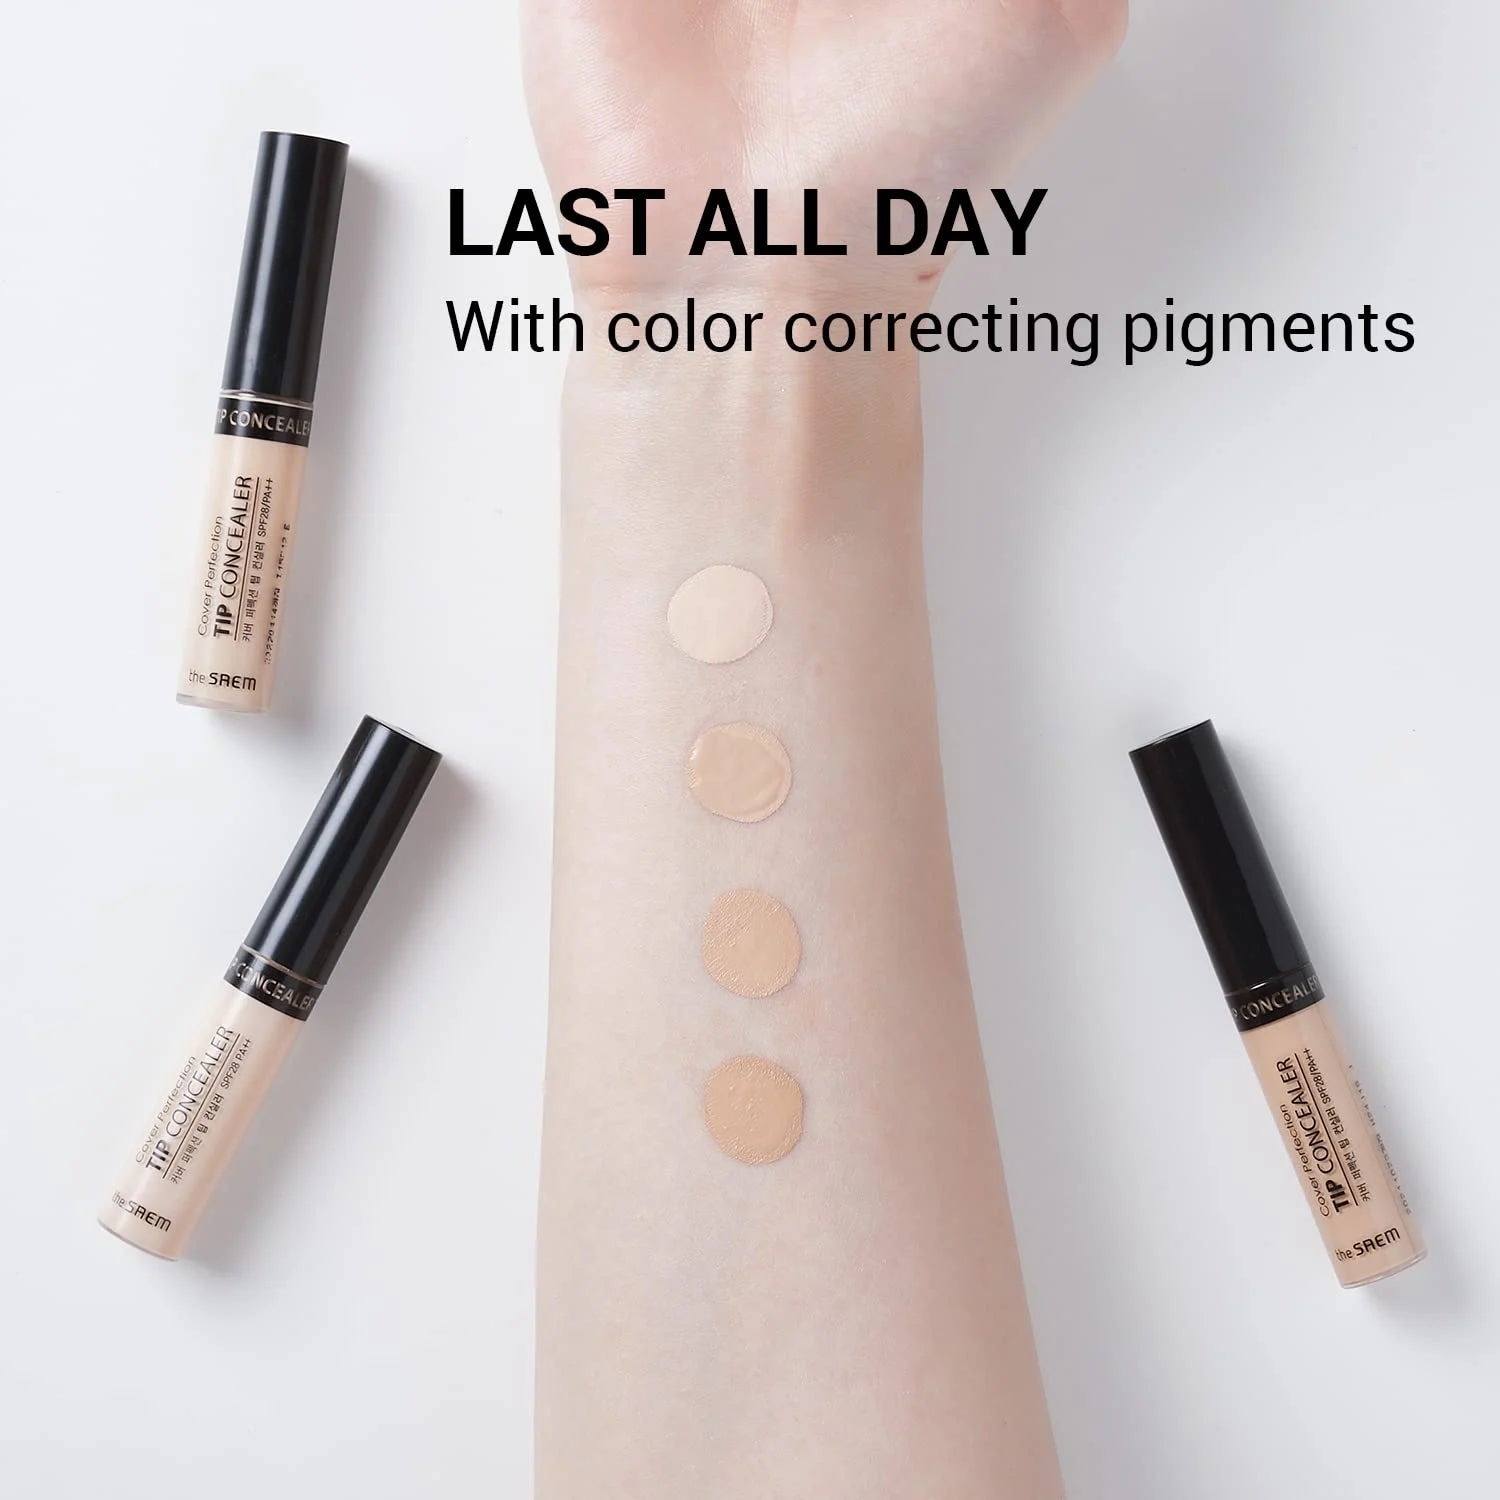 The Saem - Cover Perfection Tip Concealer